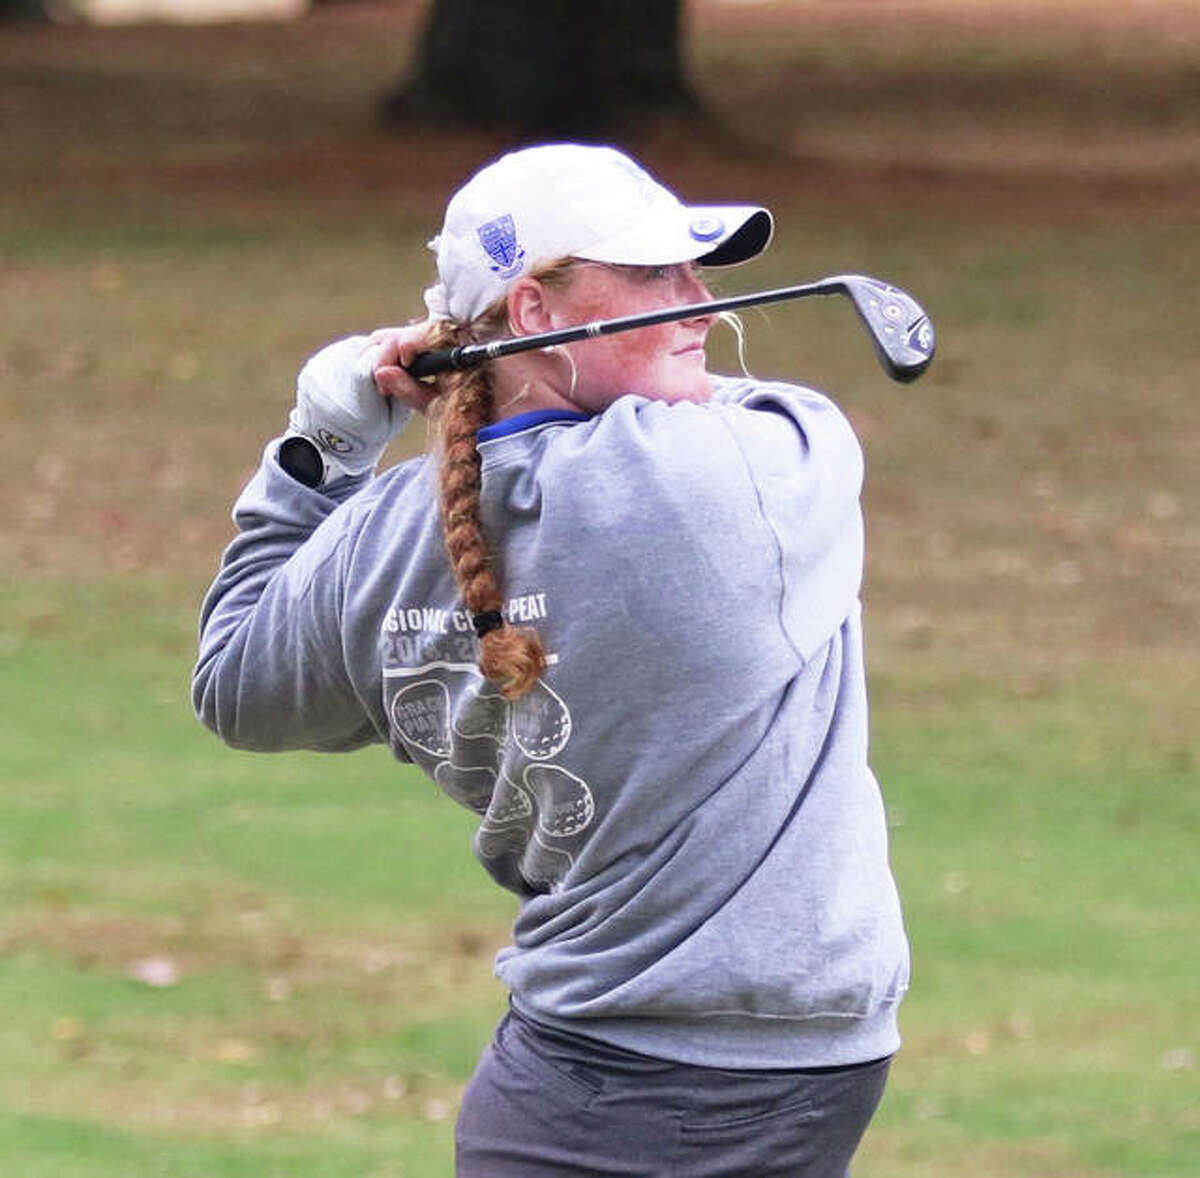 Marquette’s Gracie Piar, shown in last season’s sectional at Salem, shot 1-under par 71 to place third Friday at the Prep Tour Showcase at Hickory Point golf course in Decatur.